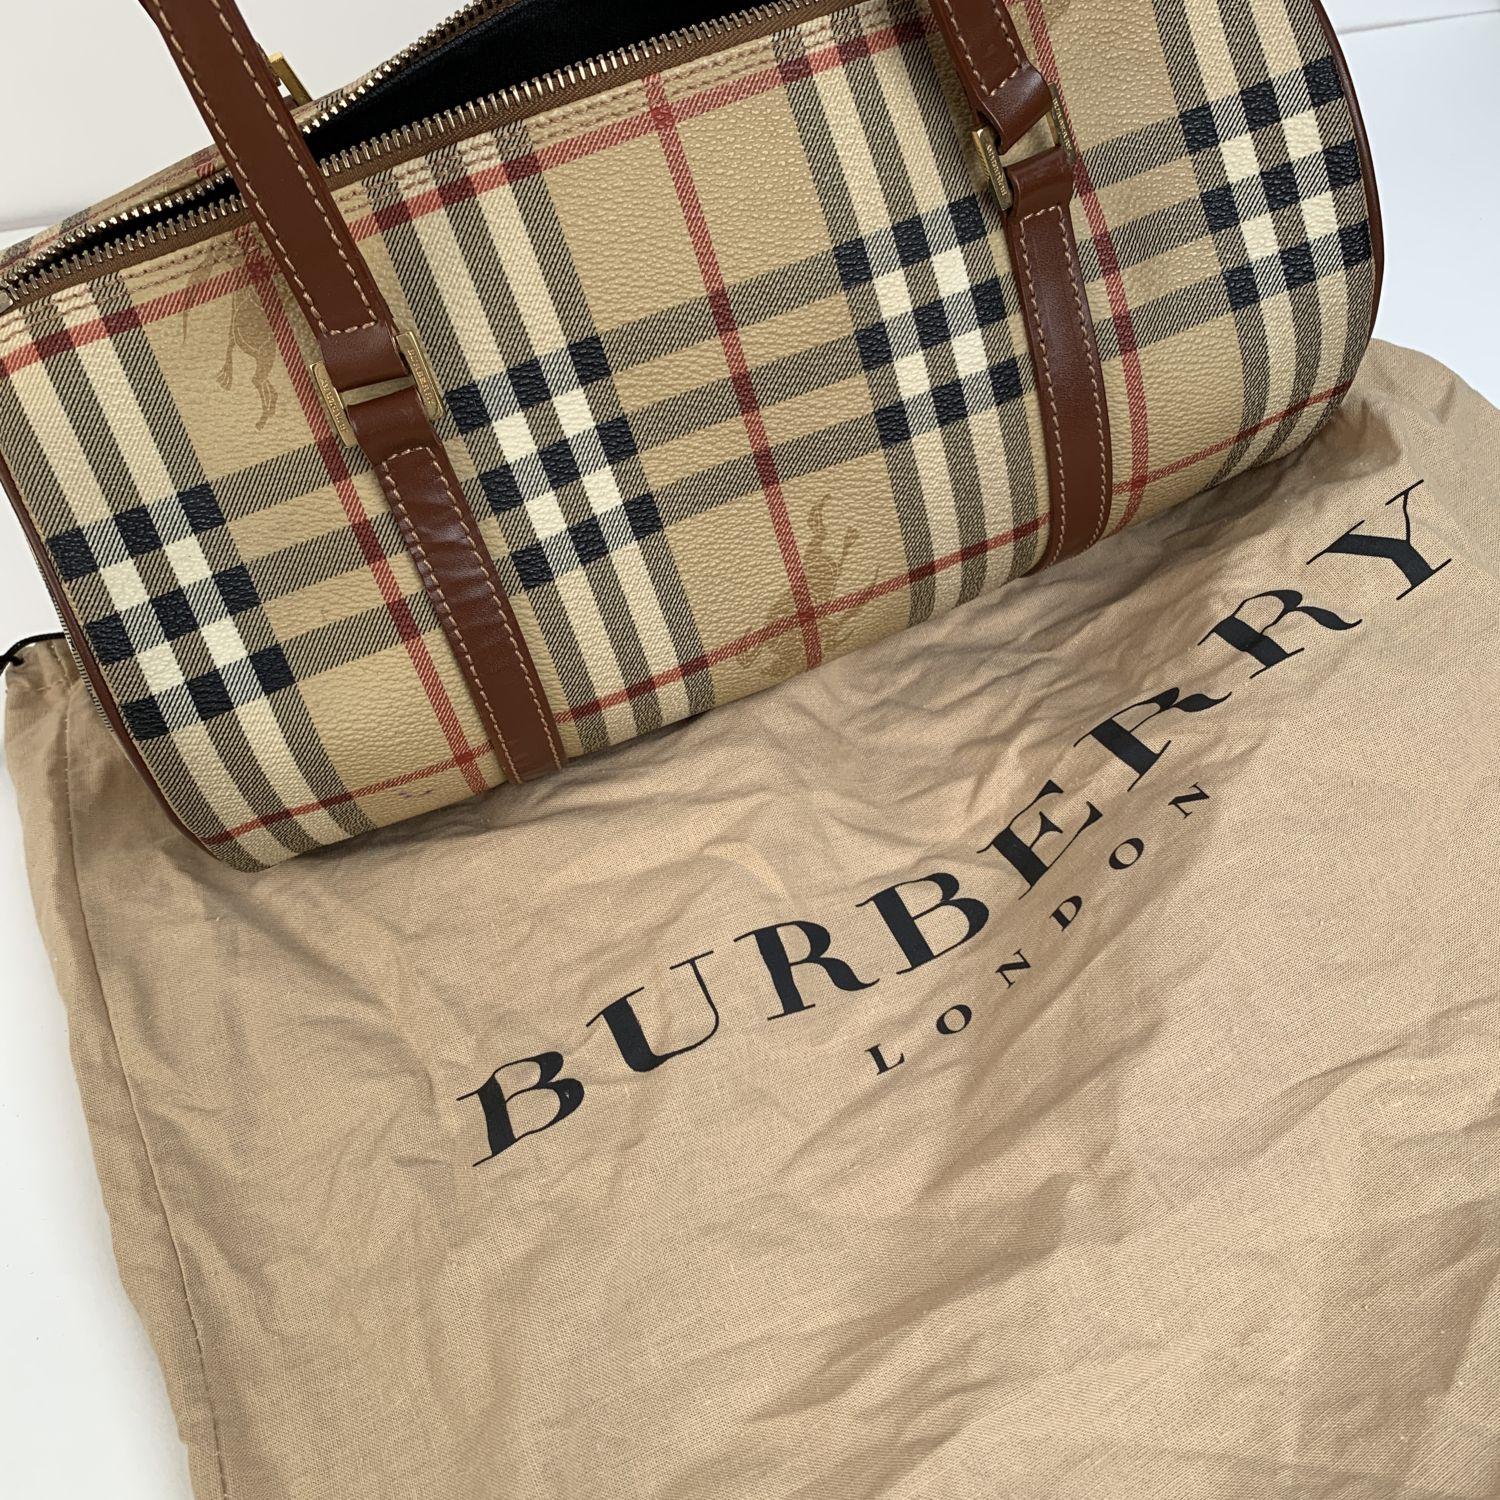 This beautiful Bag will come with a Certificate of Authenticity provided by Entrupy, leading International Fashion Authenticators. The certificate will be provided at no further cost.

- Burberry Beige Nova Check Canvas Rounded Shape Handbag
-